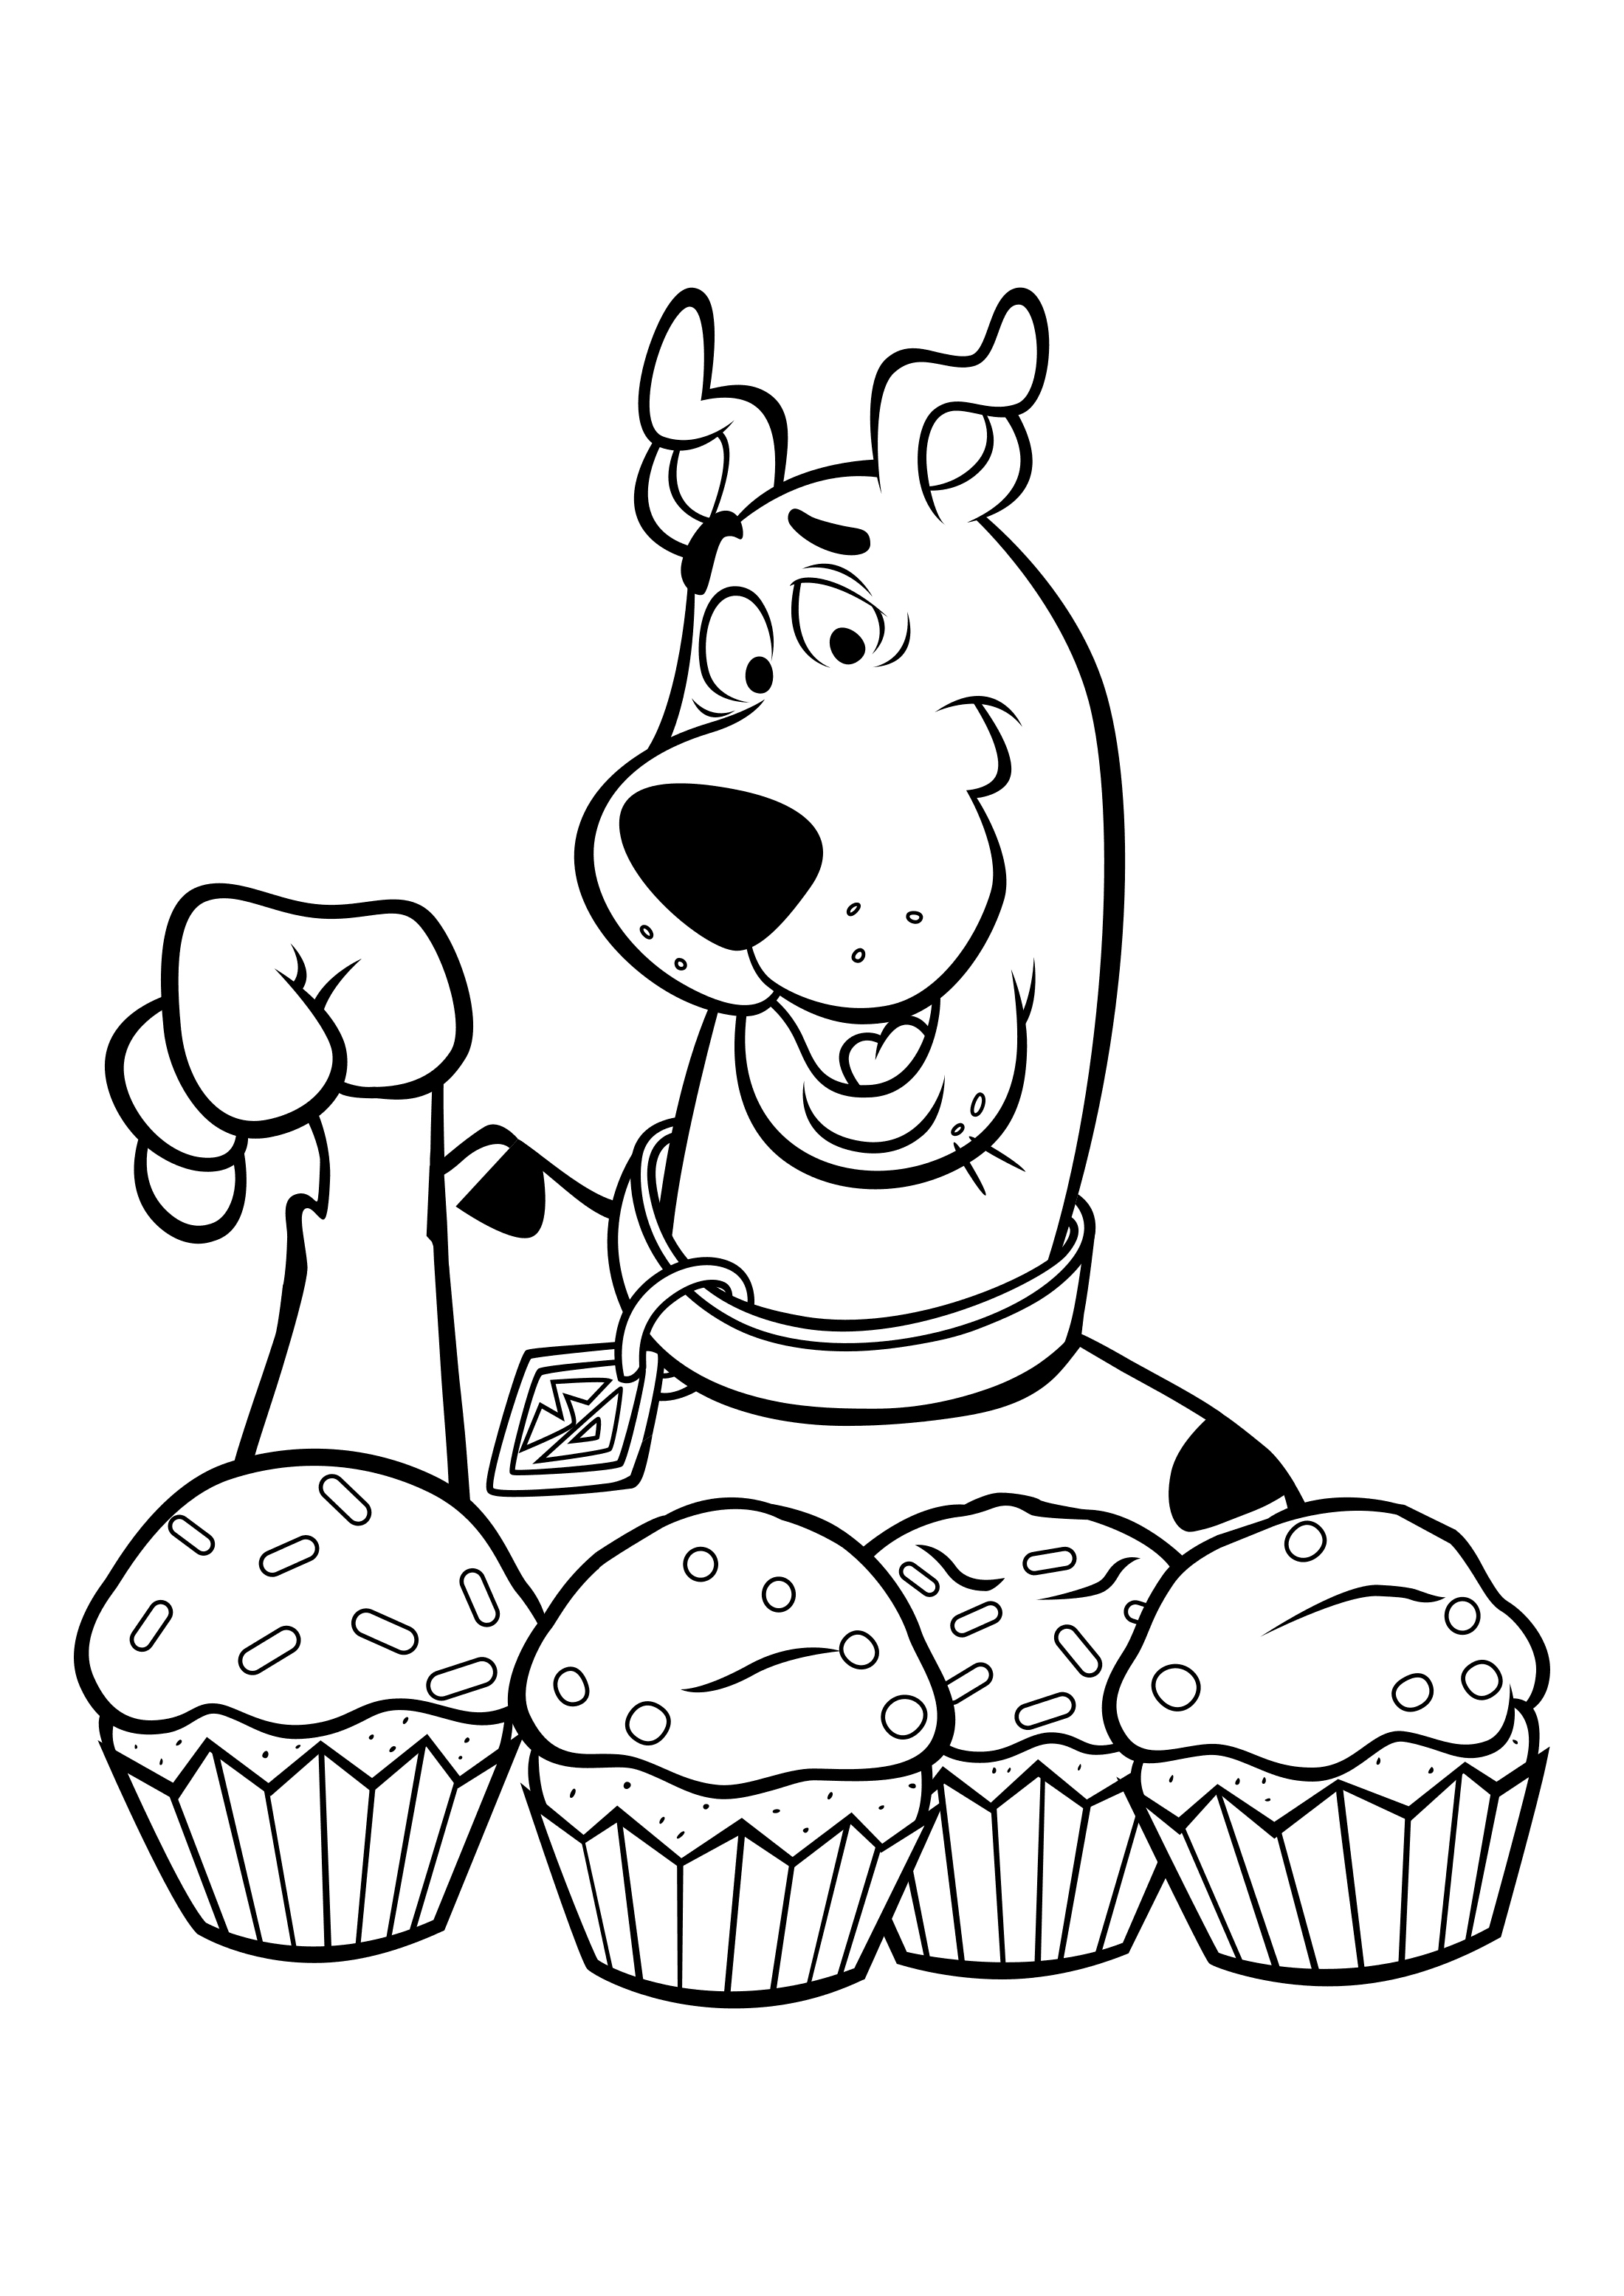 Coloring Pages of Scooby-Doo Cartoon Print